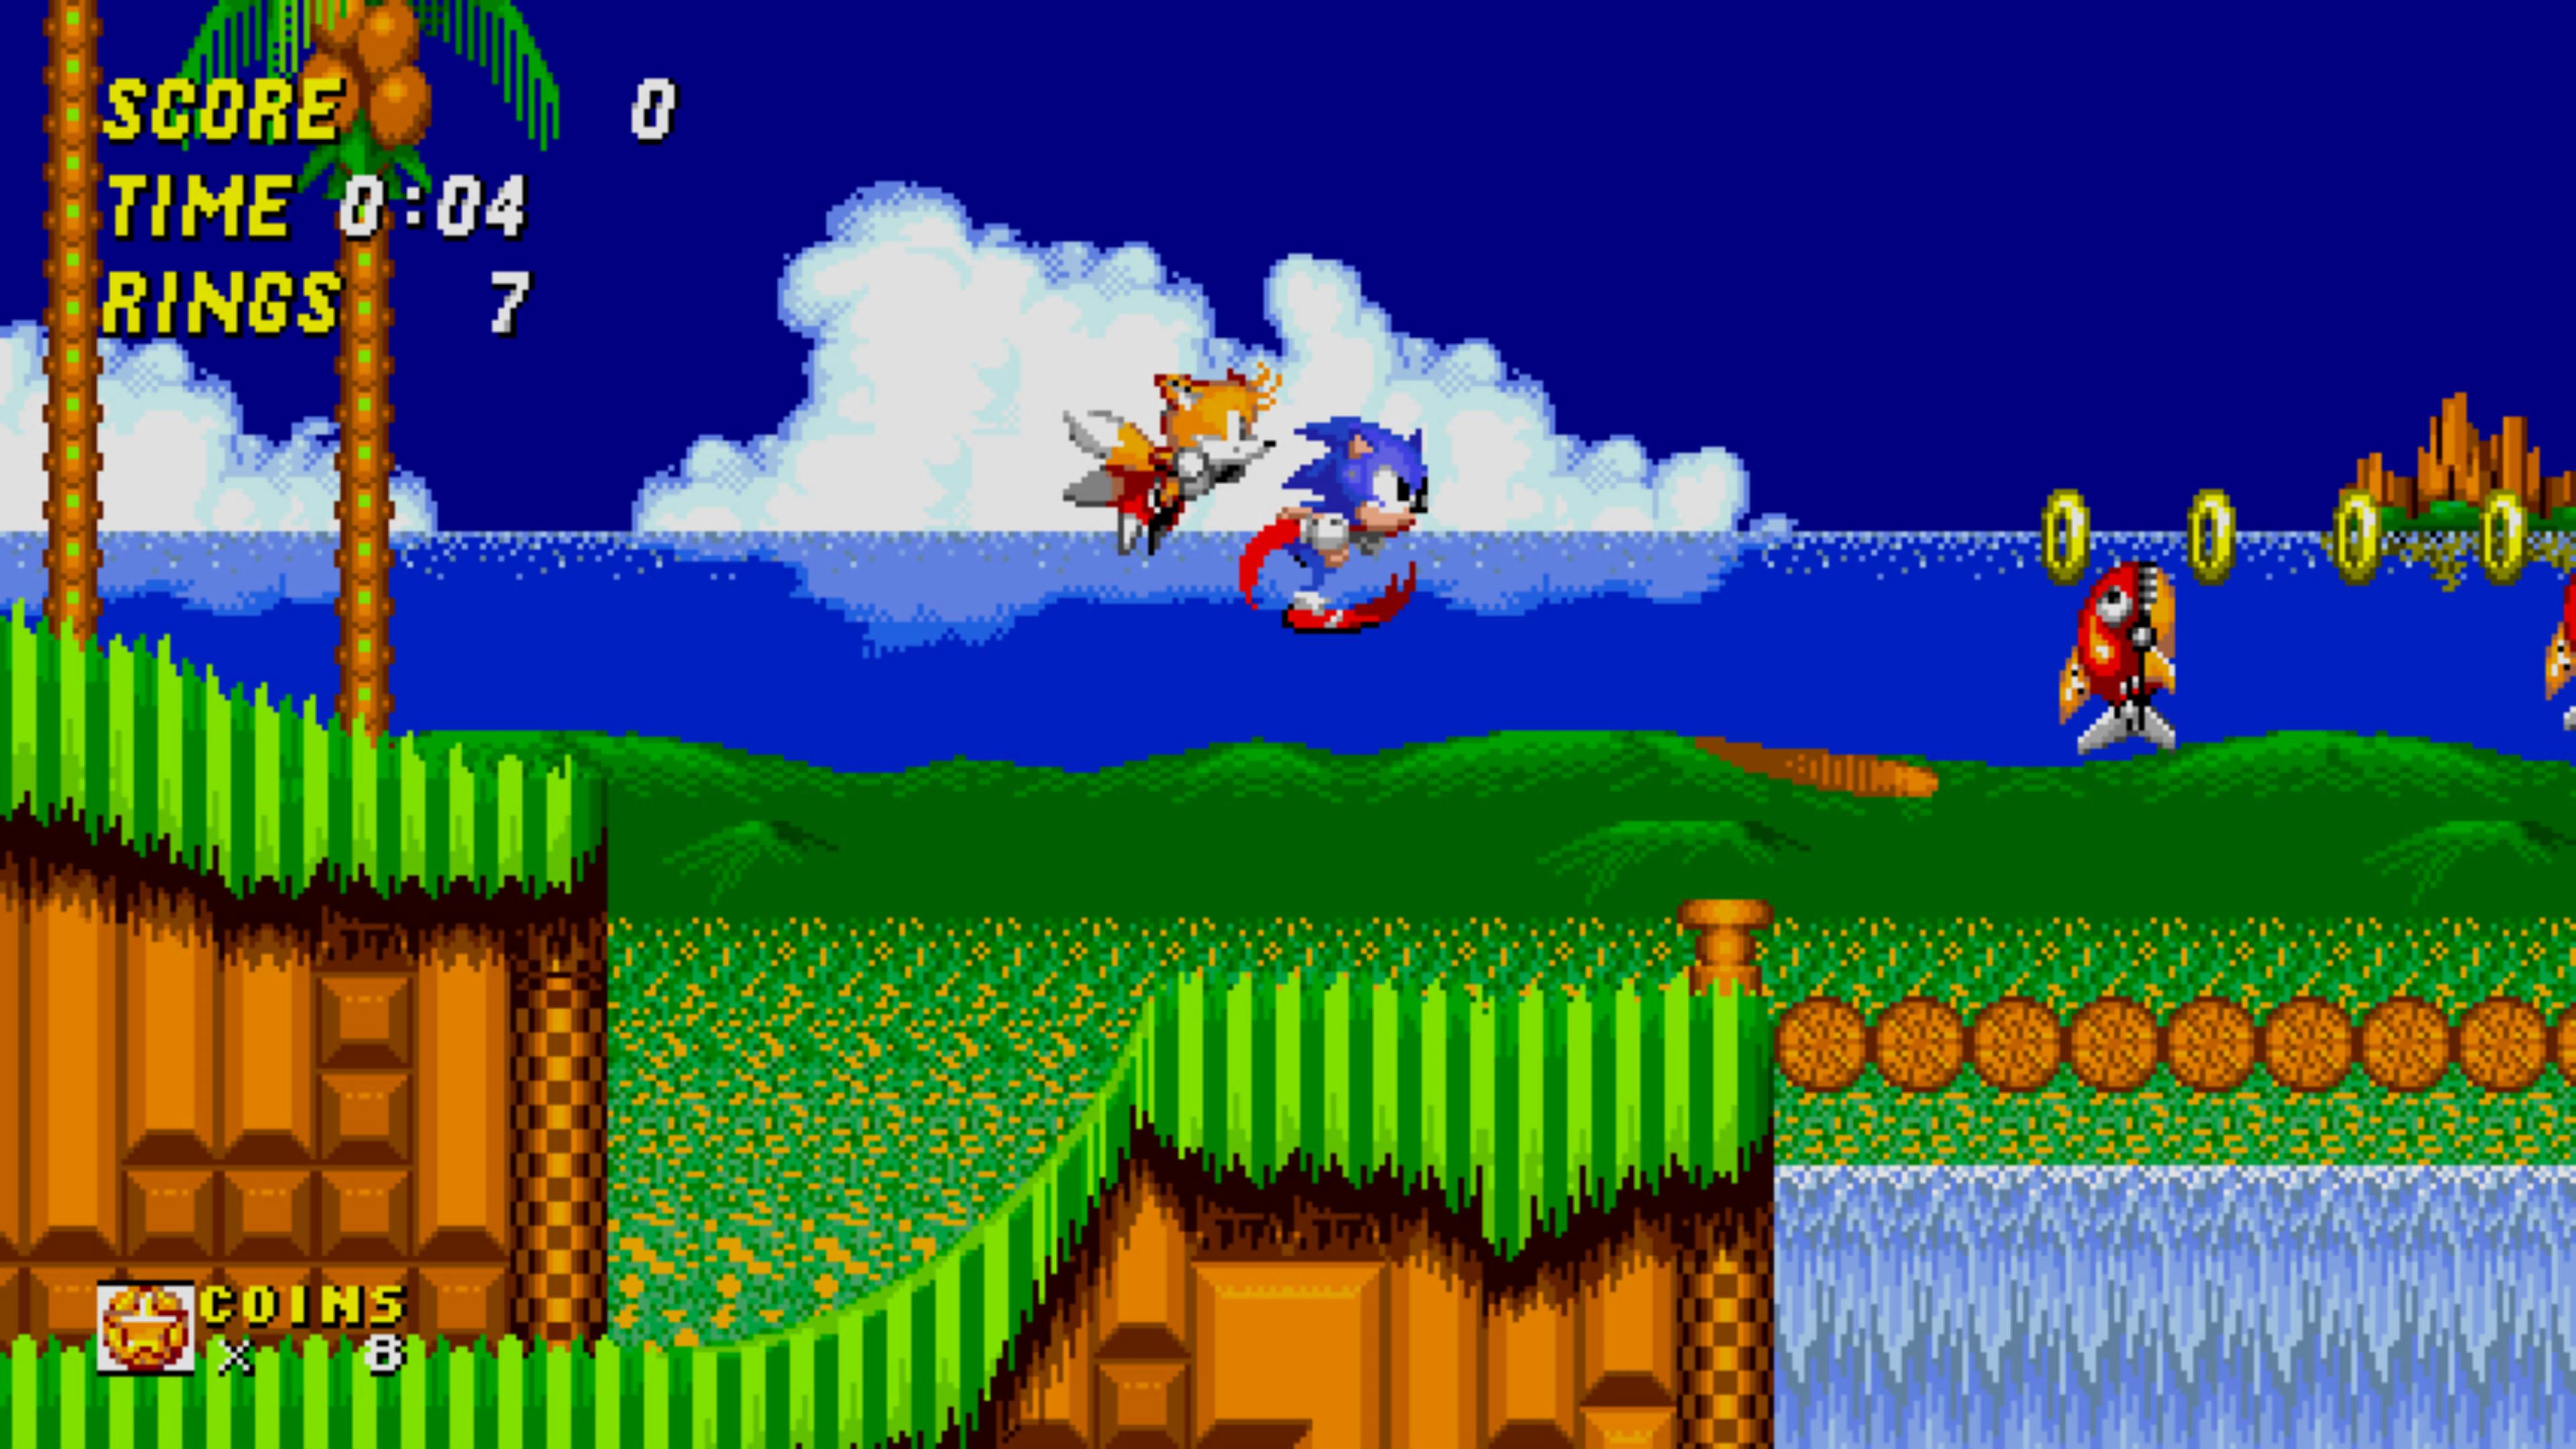 Review: Sonic Origins is a tragic example of good classics ruined by greed  | Ars Technica